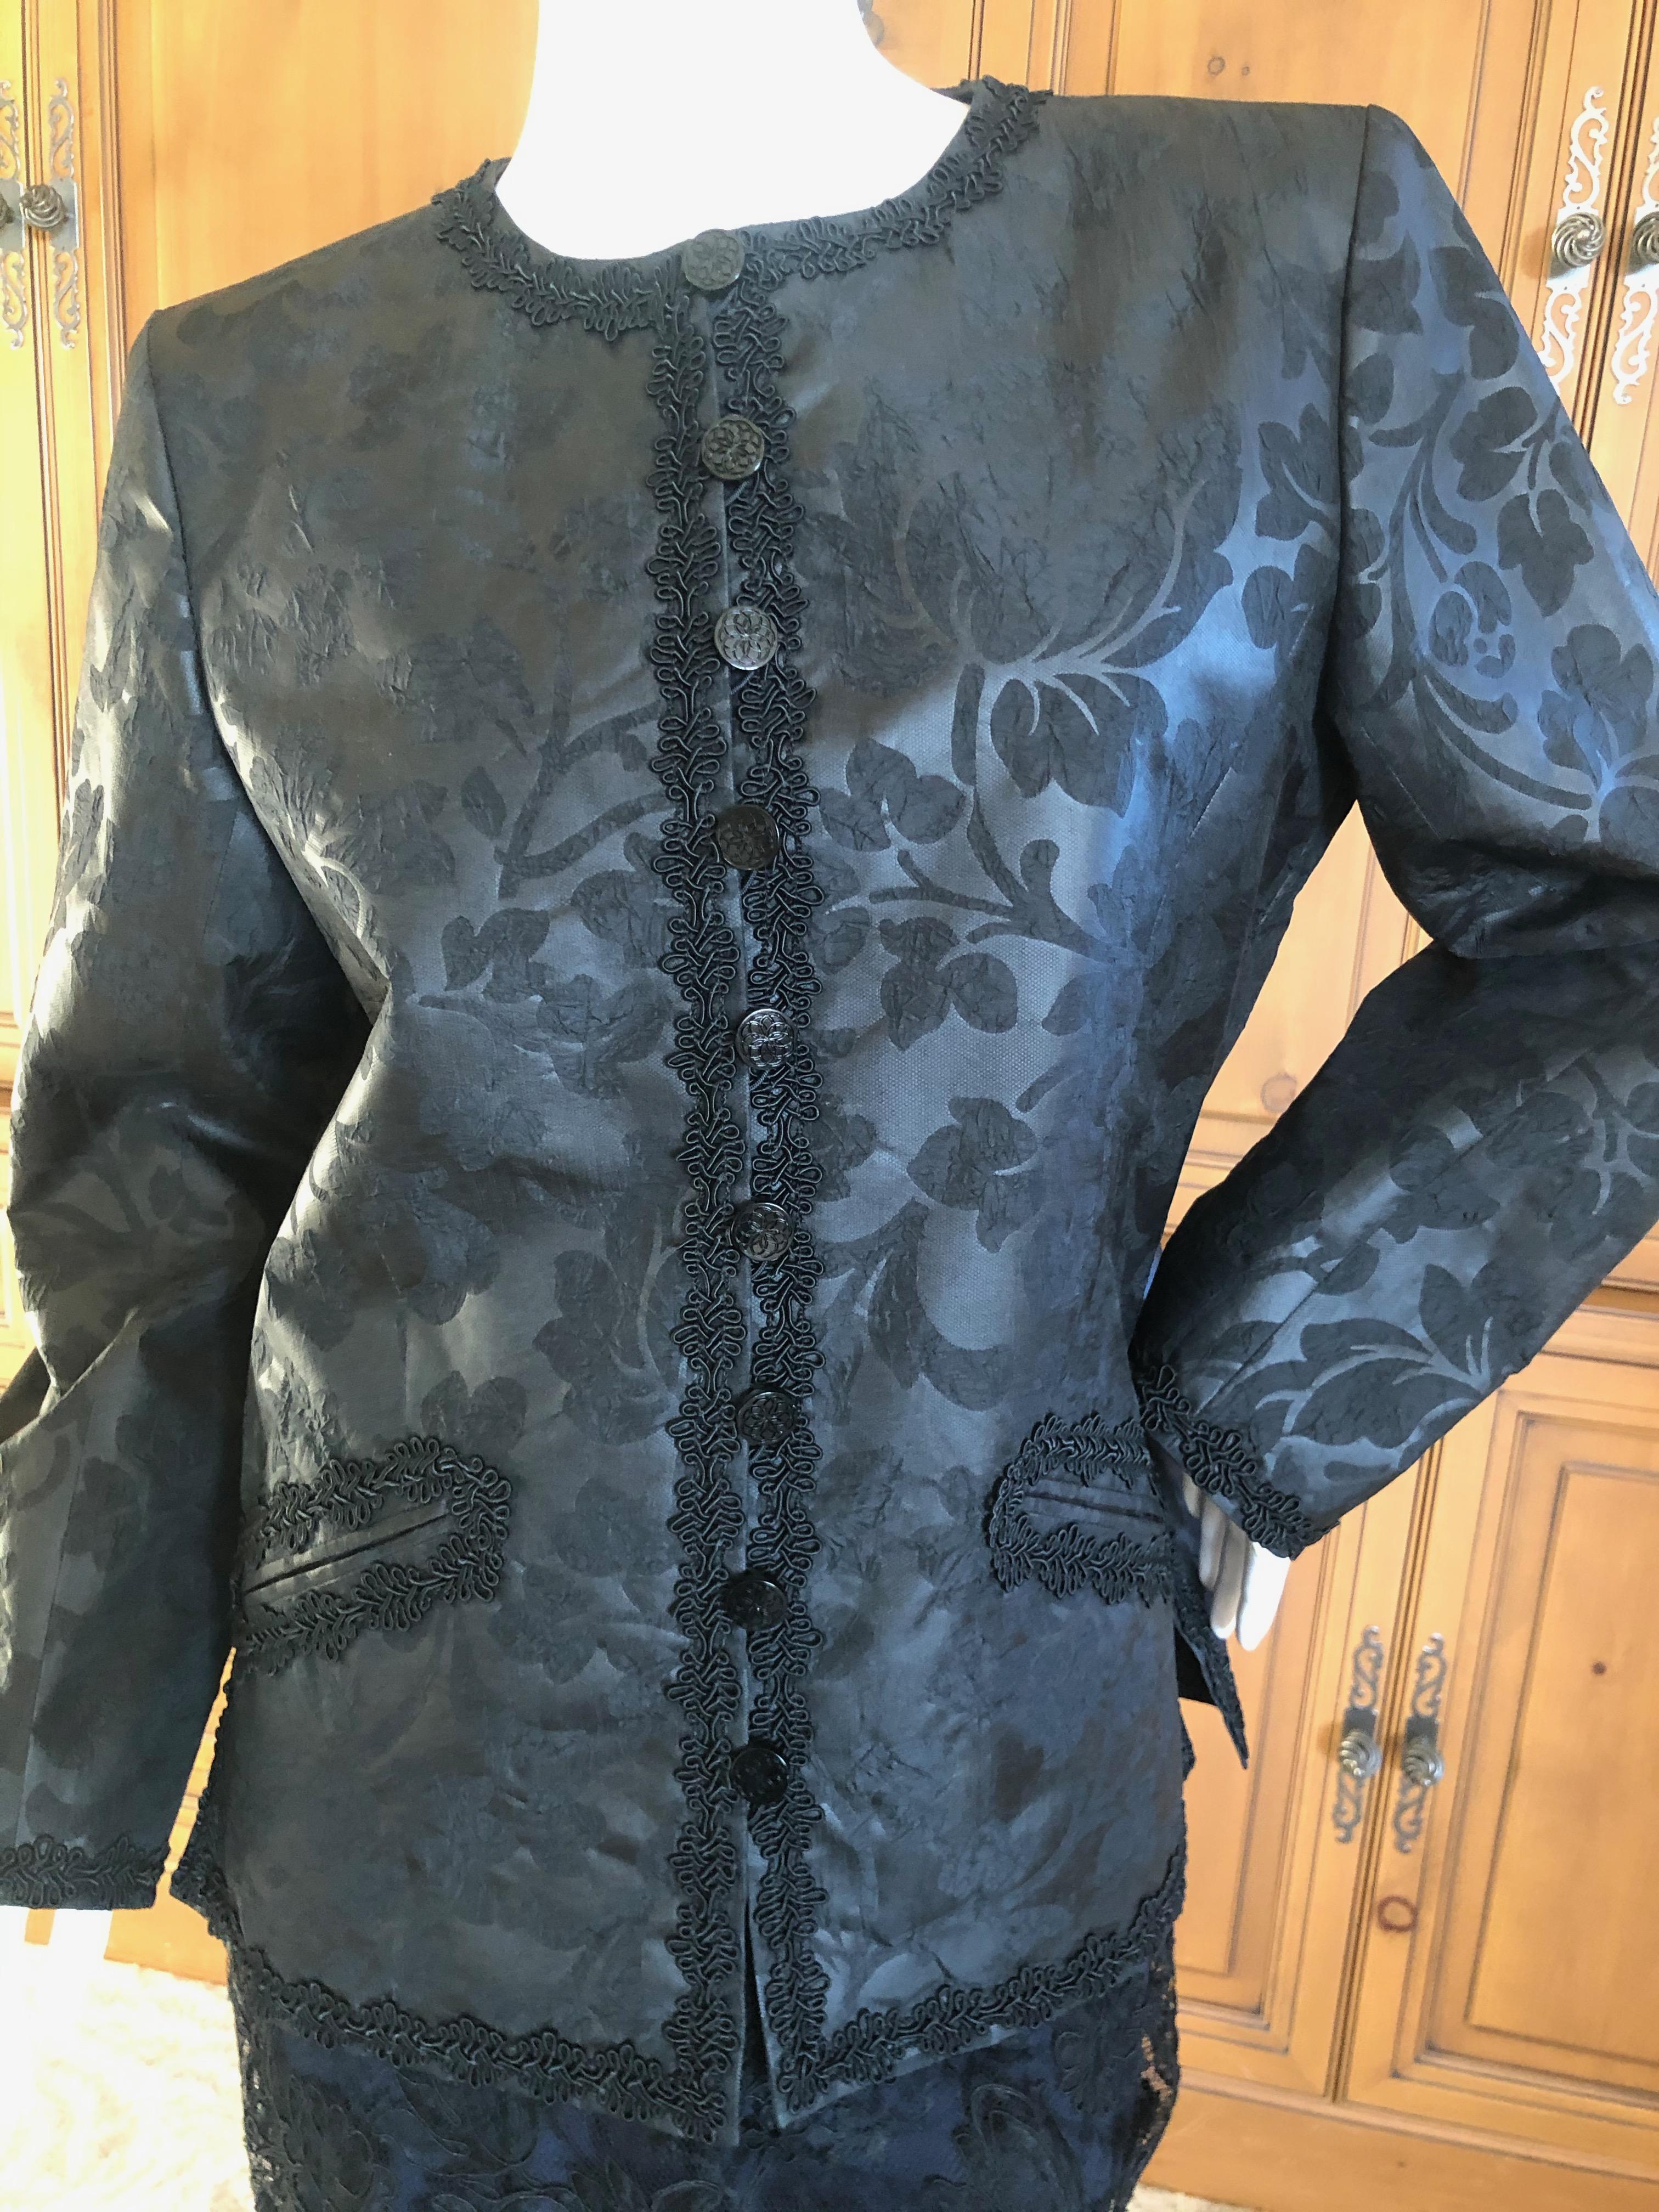 Yves Saint Laurent Vintage 1980's Black Brocade Jacket with Soutache Piping For Sale 4